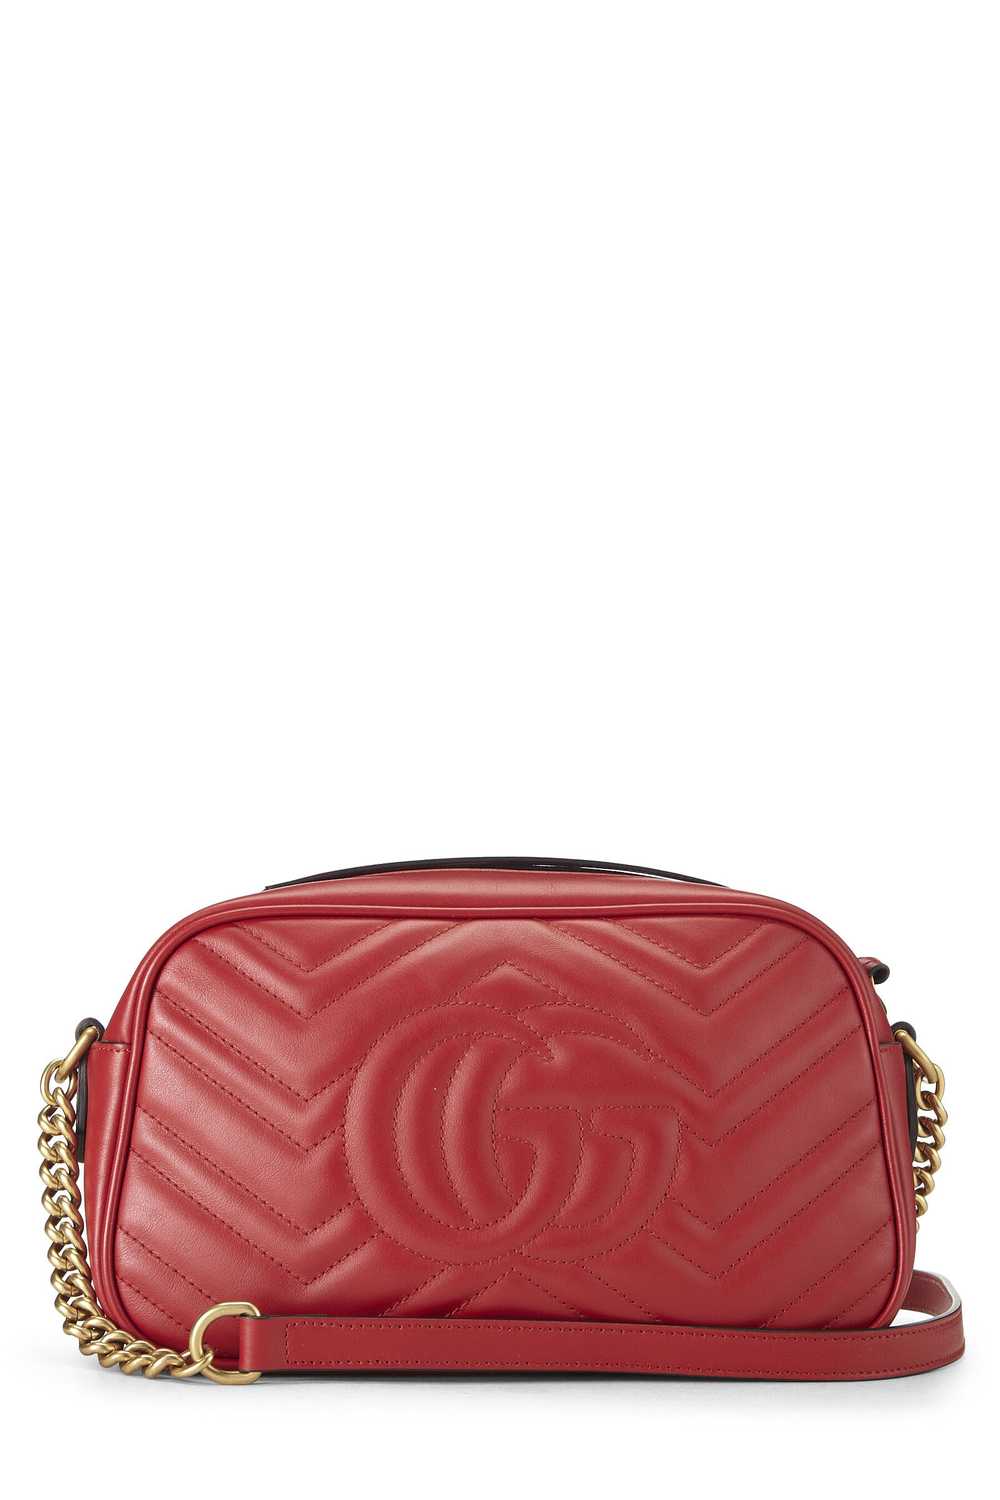 Red Leather GG Marmont Crossbody Bag Small - image 4